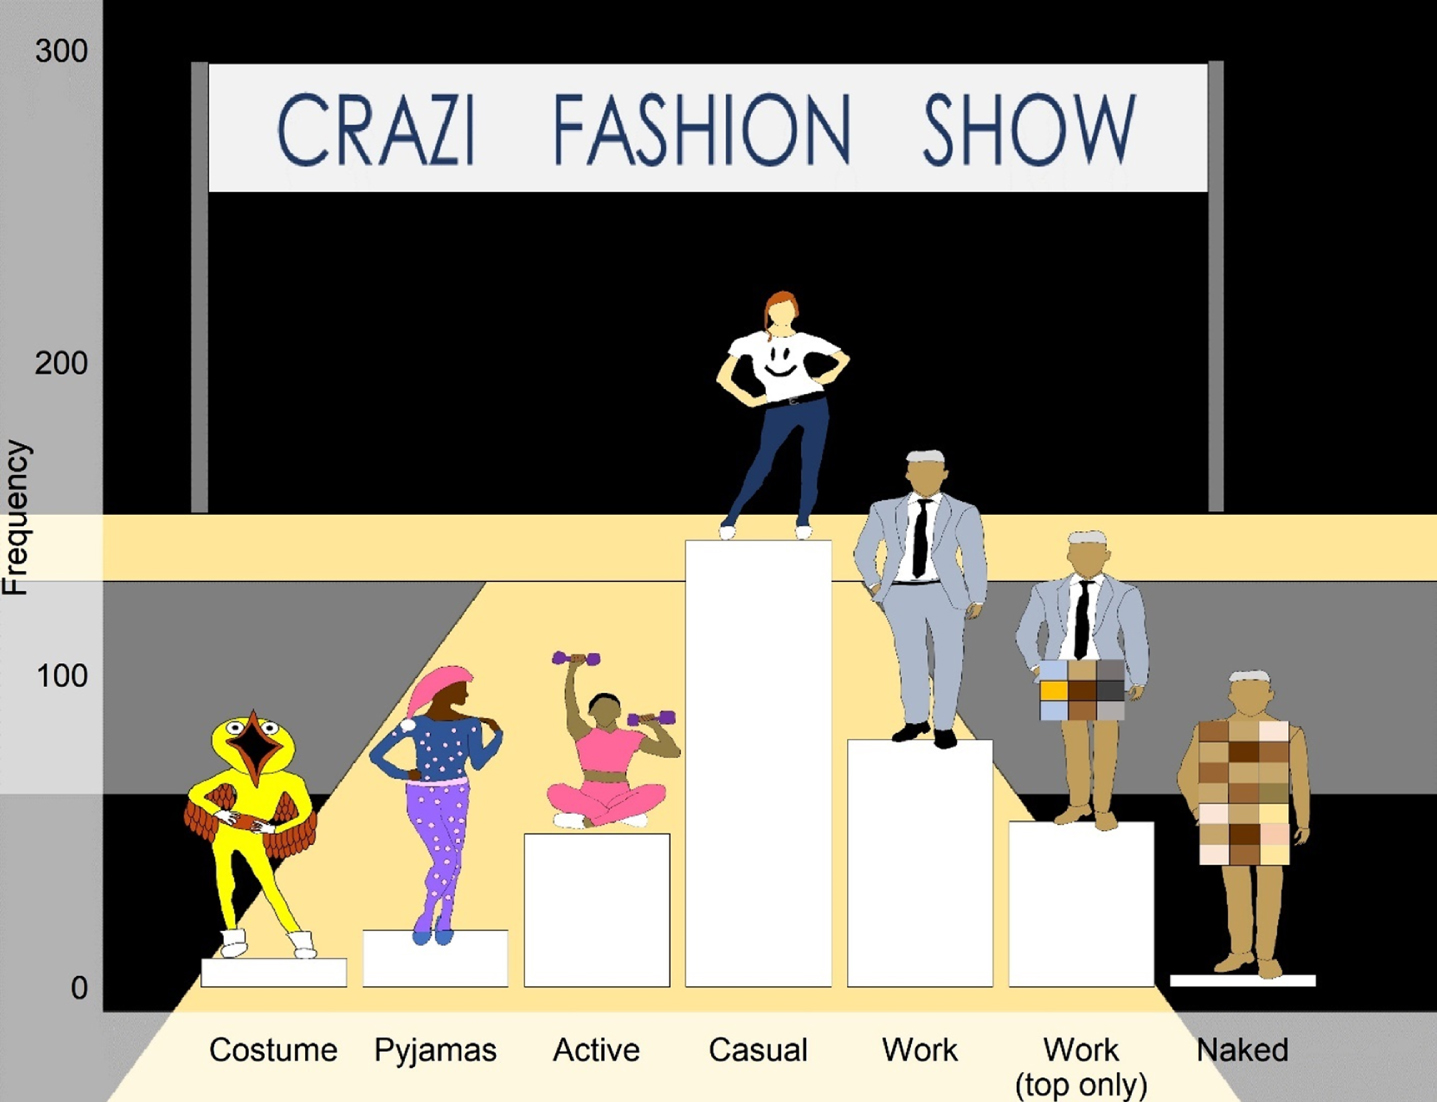 Frequency of fashion choices for CRAZI meetings.